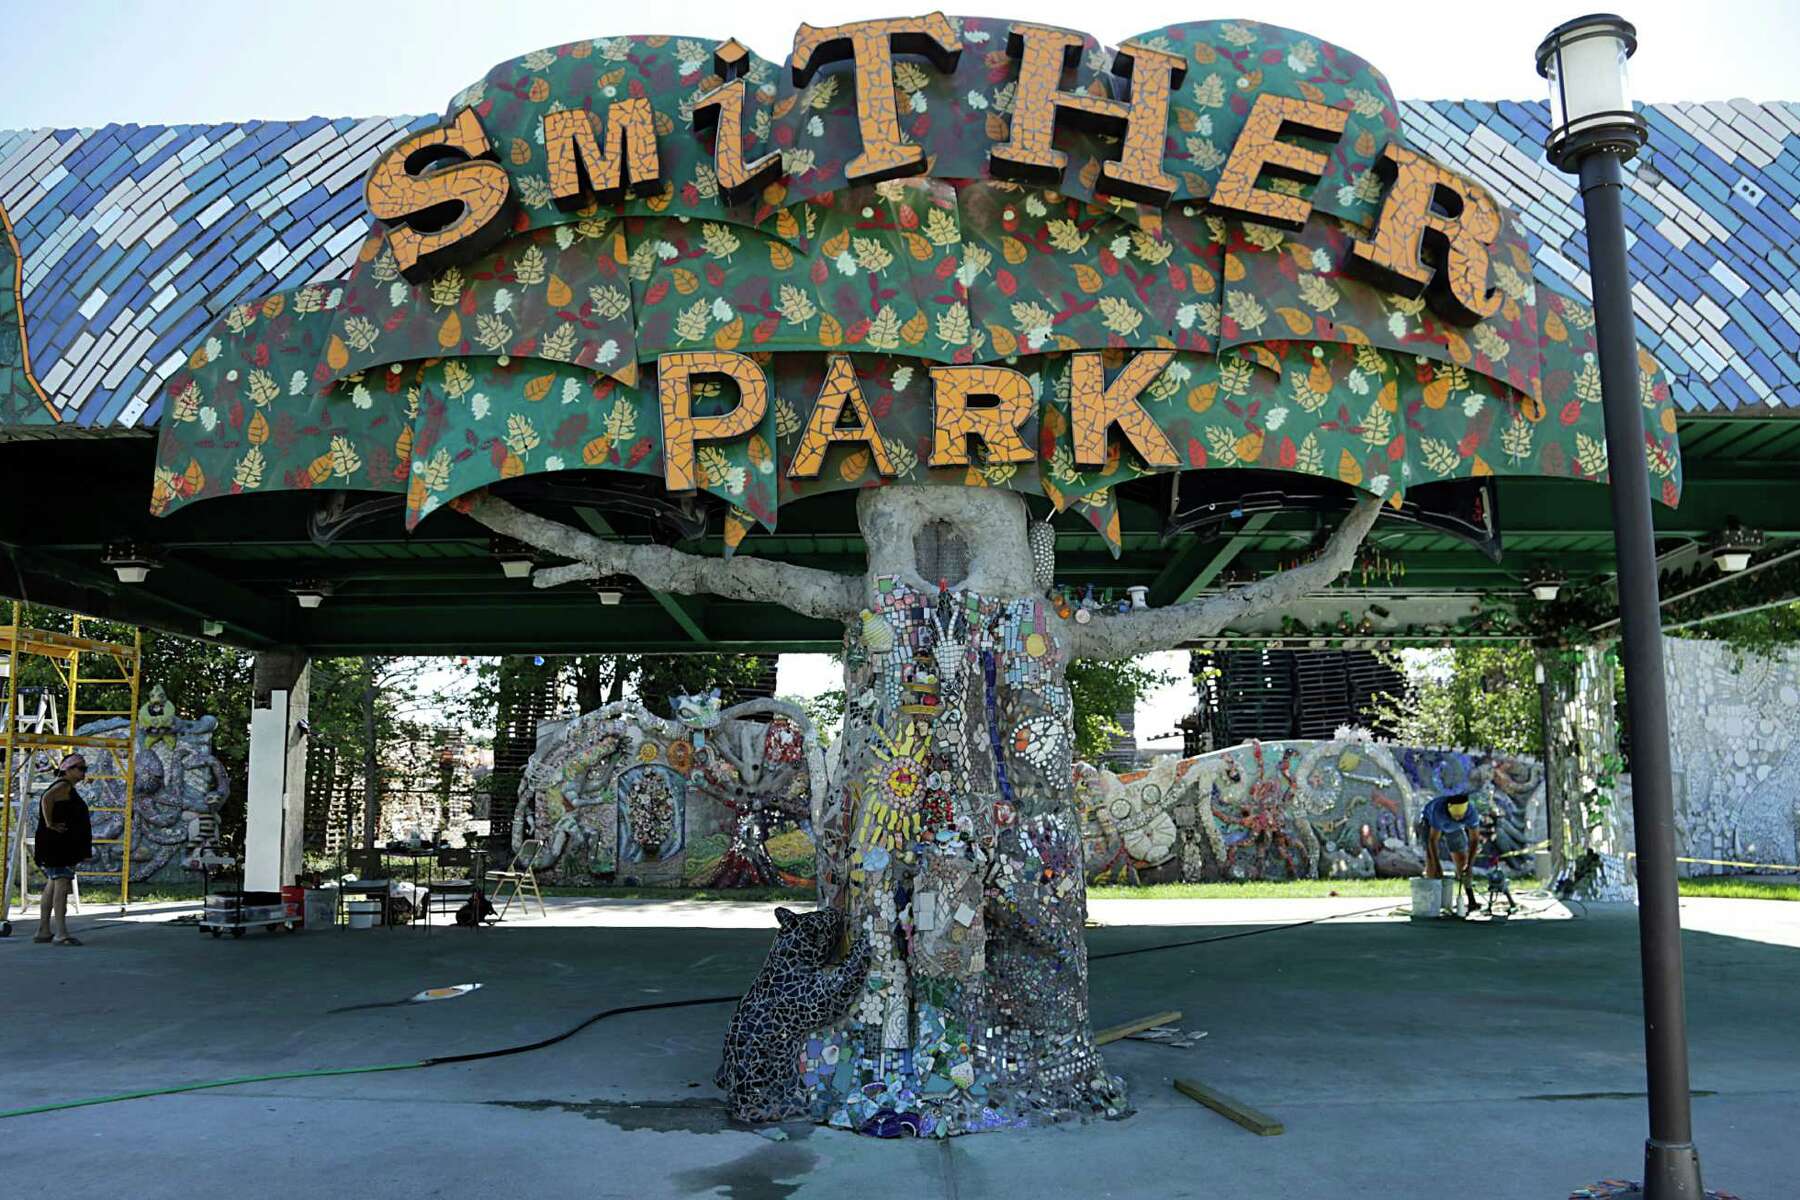 Smither Park